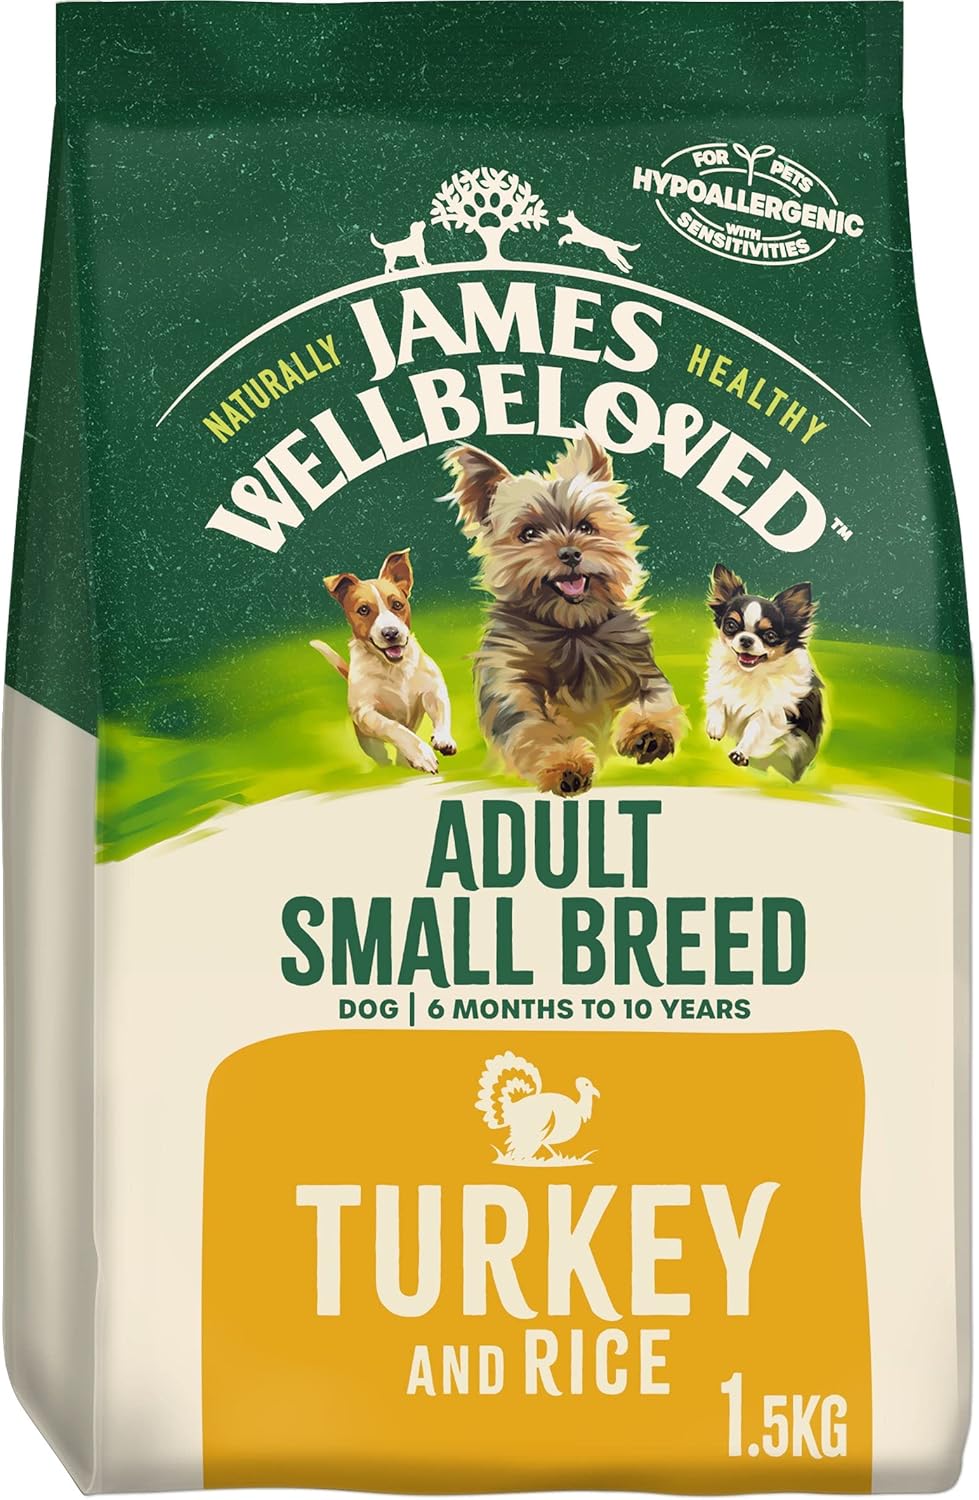 James Wellbeloved Adult Small Breed Turkey and Rice 1.5 kg Bag, Hypoallergenic Dry Dog Food?02JWSBT1